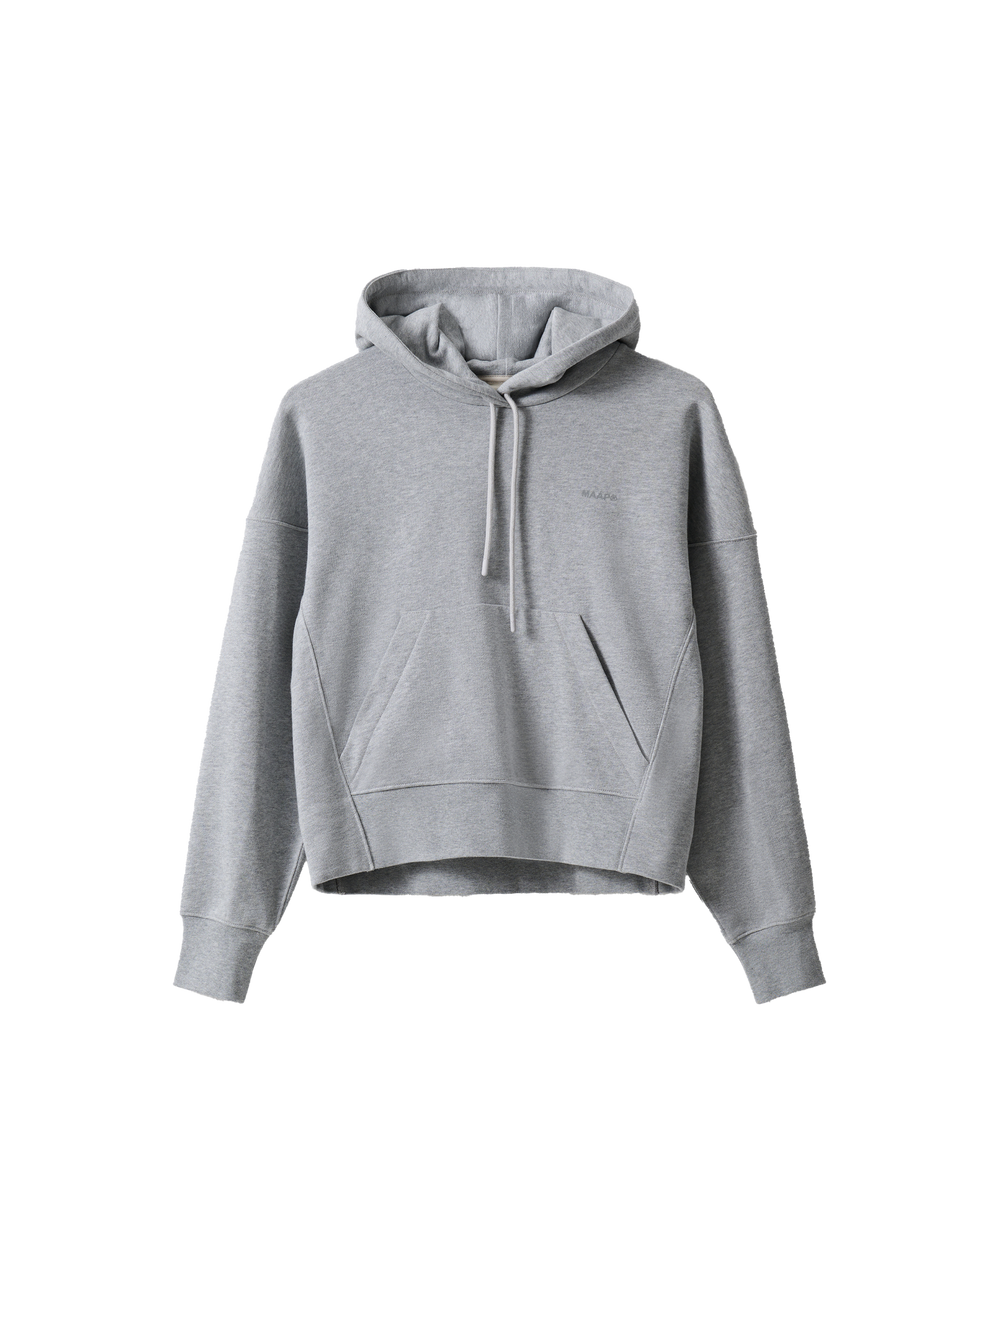 Product Image for Women's Essentials Hoodie